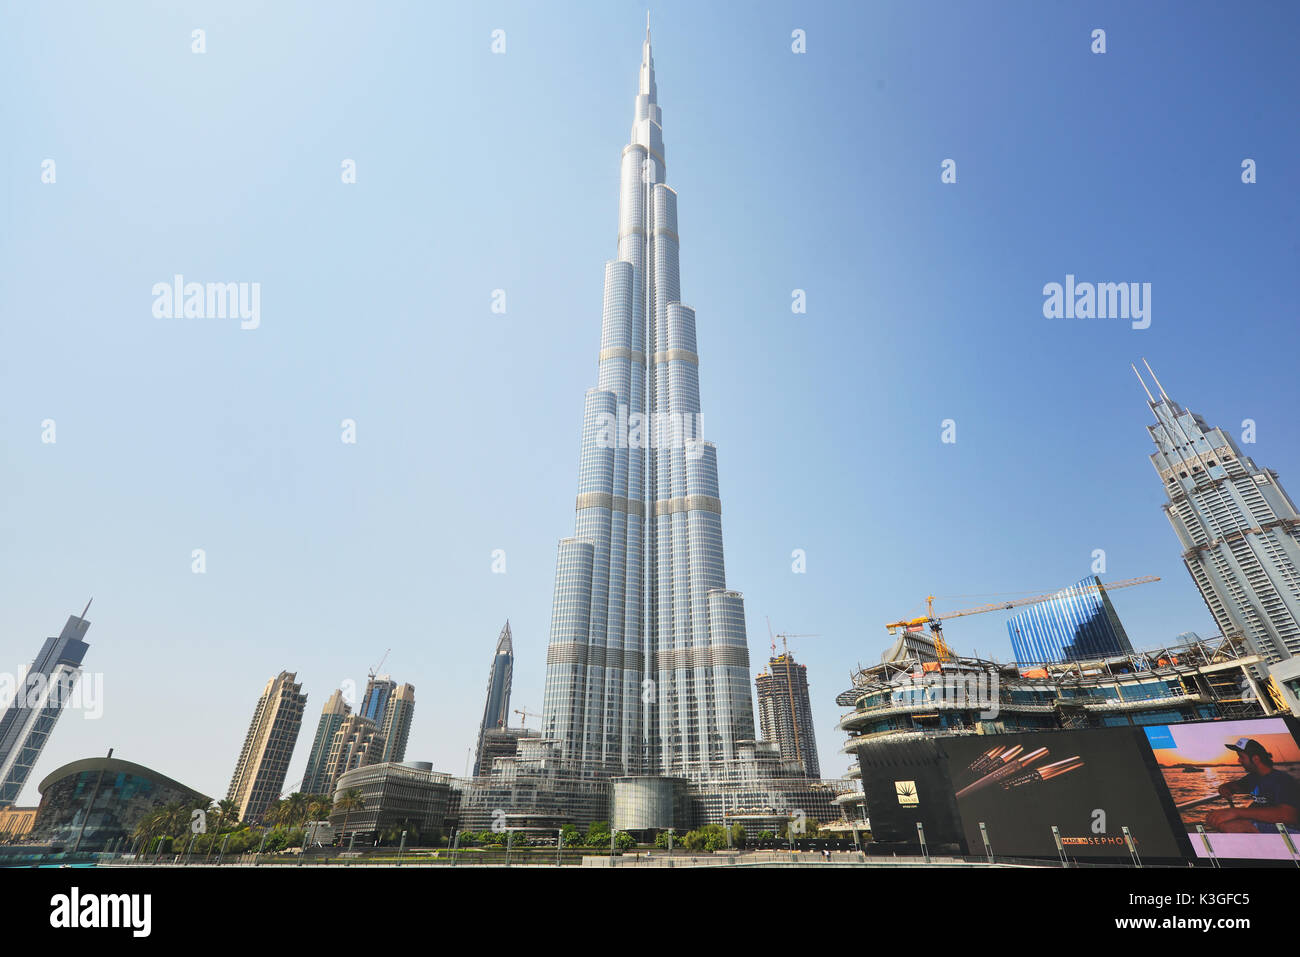 DUBAI, UNITED ARAB EMIRATES - Oct 7, 2016: Downtown Dubai with the Burj Khalifa tower. This skyscraper is the tallest man-made structure in the world, Stock Photo